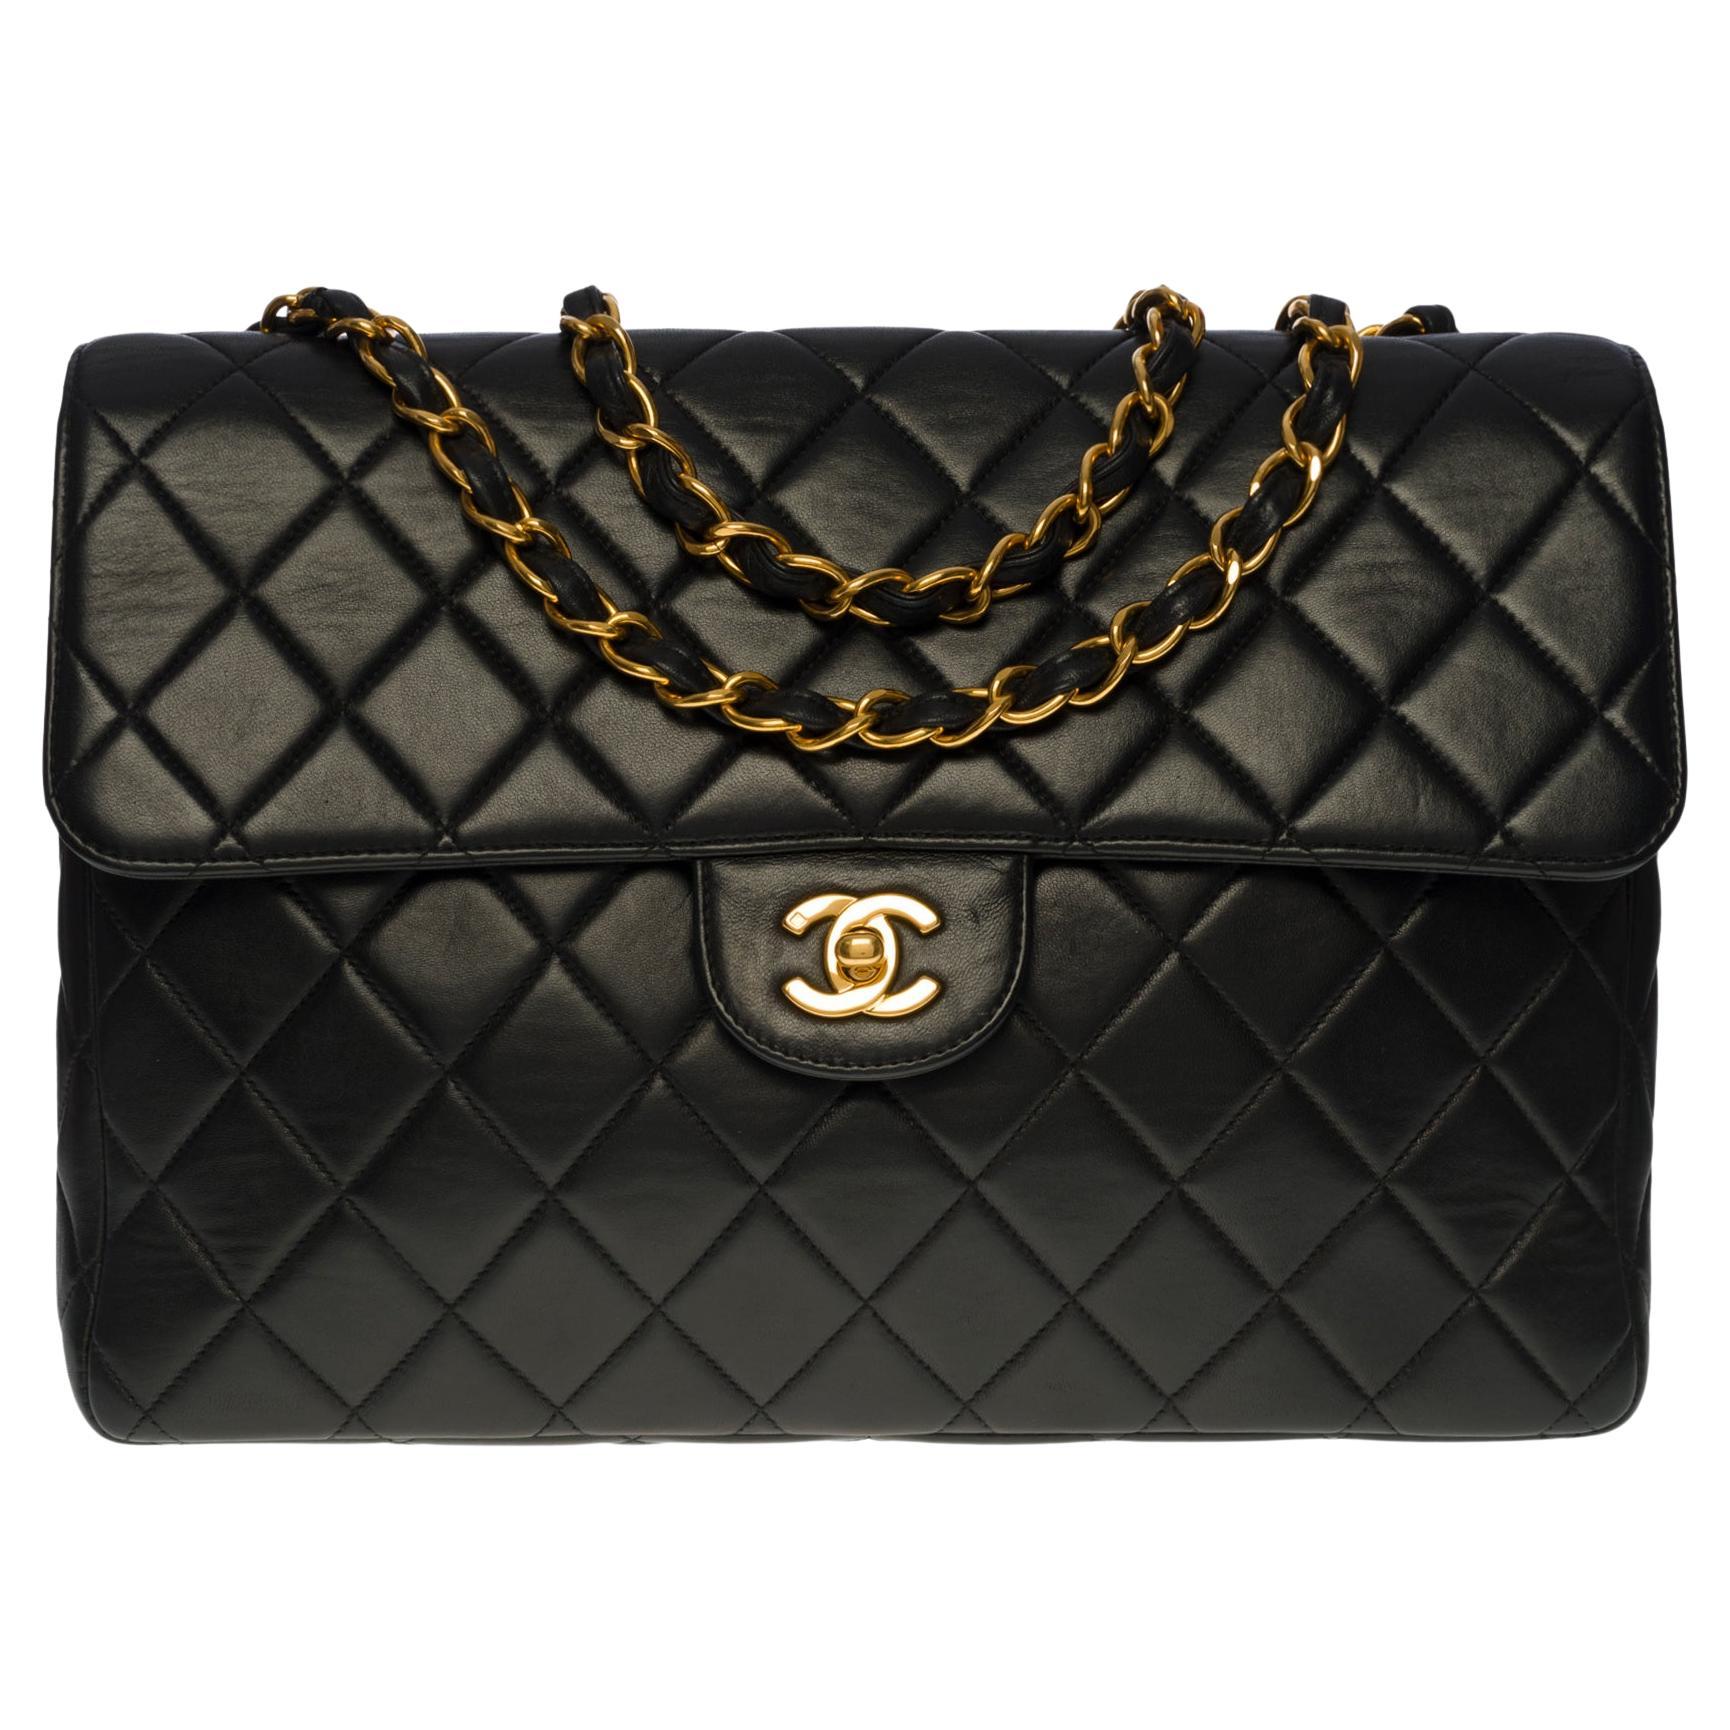 Chanel Timeless Jumbo single shoulder flap bag in black quilted lambskin, GHW For Sale